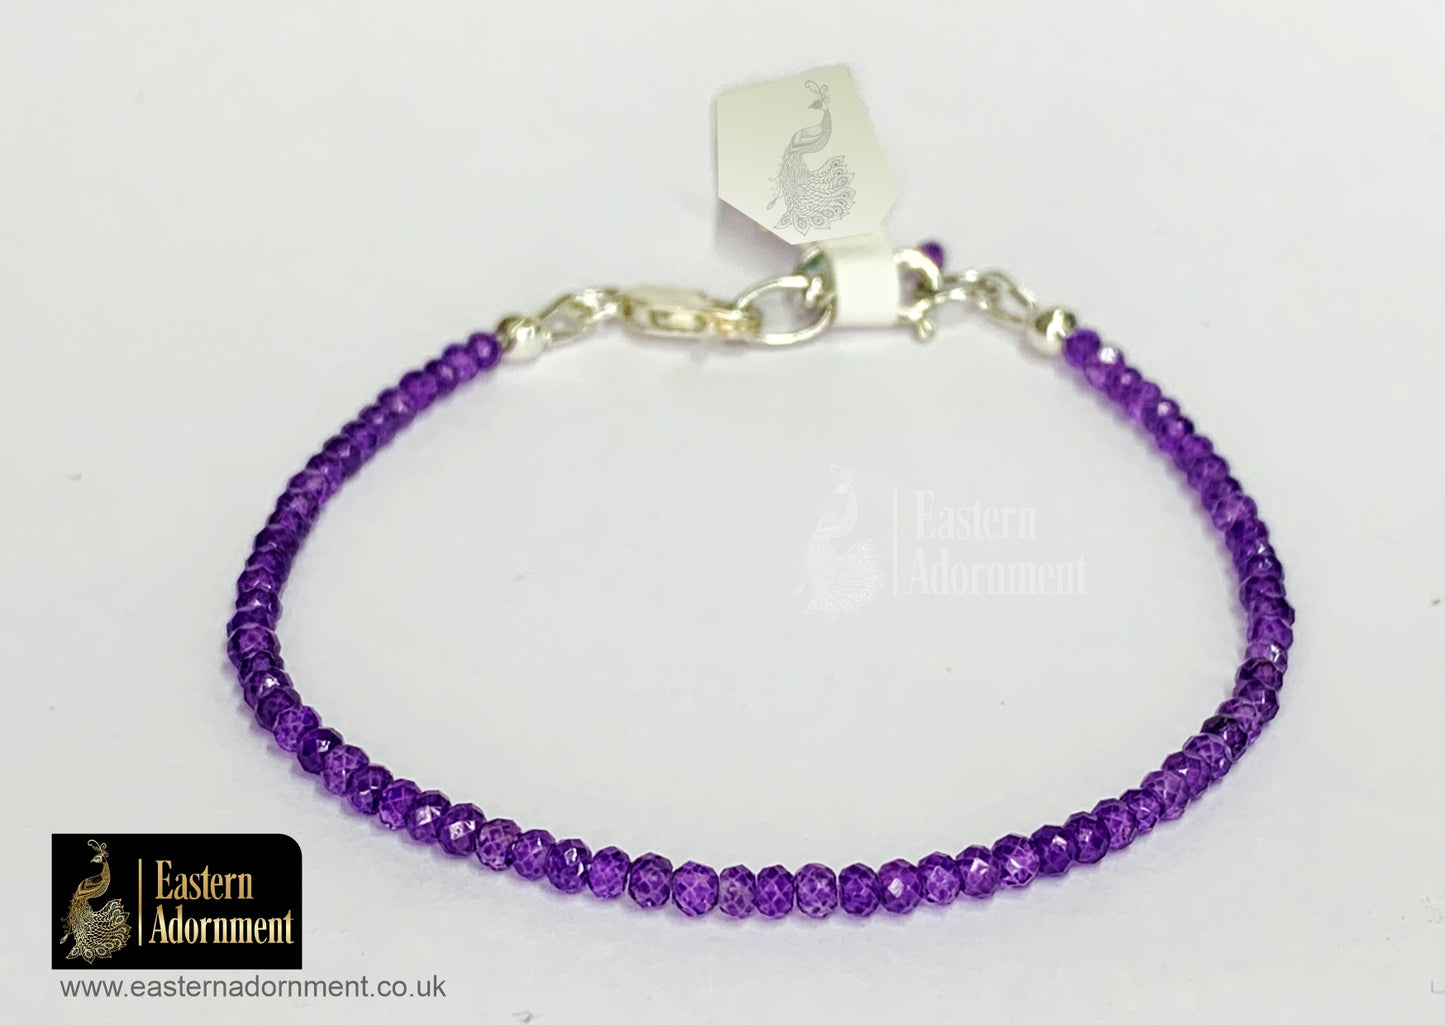 Amethyst Micro Cut Bead Bracelet with Silver Charm Clasp